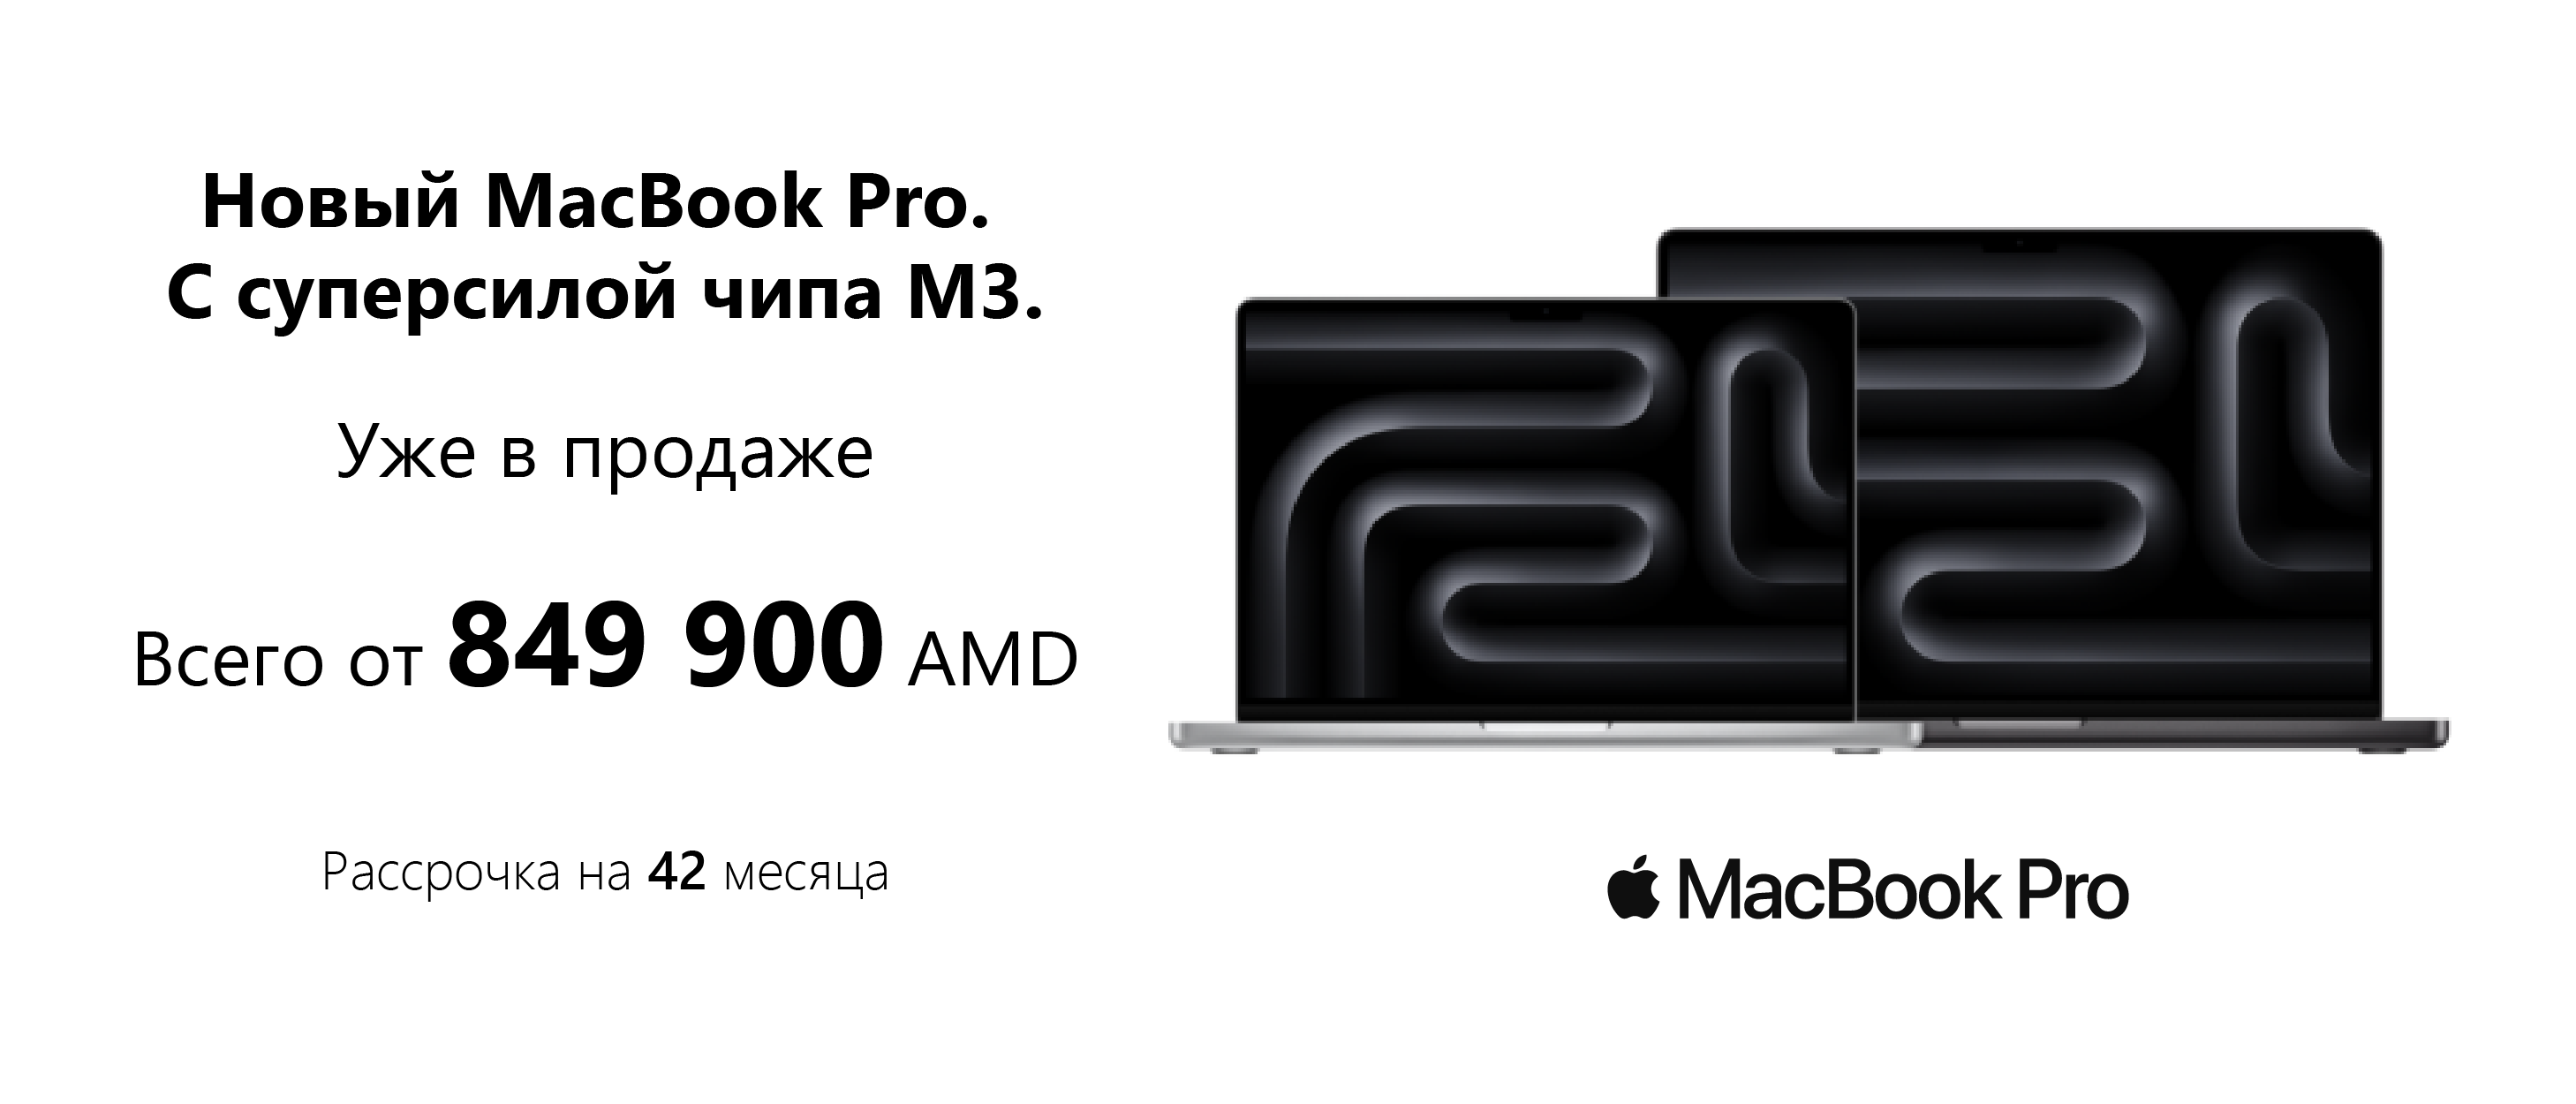 MacBook Pro available now